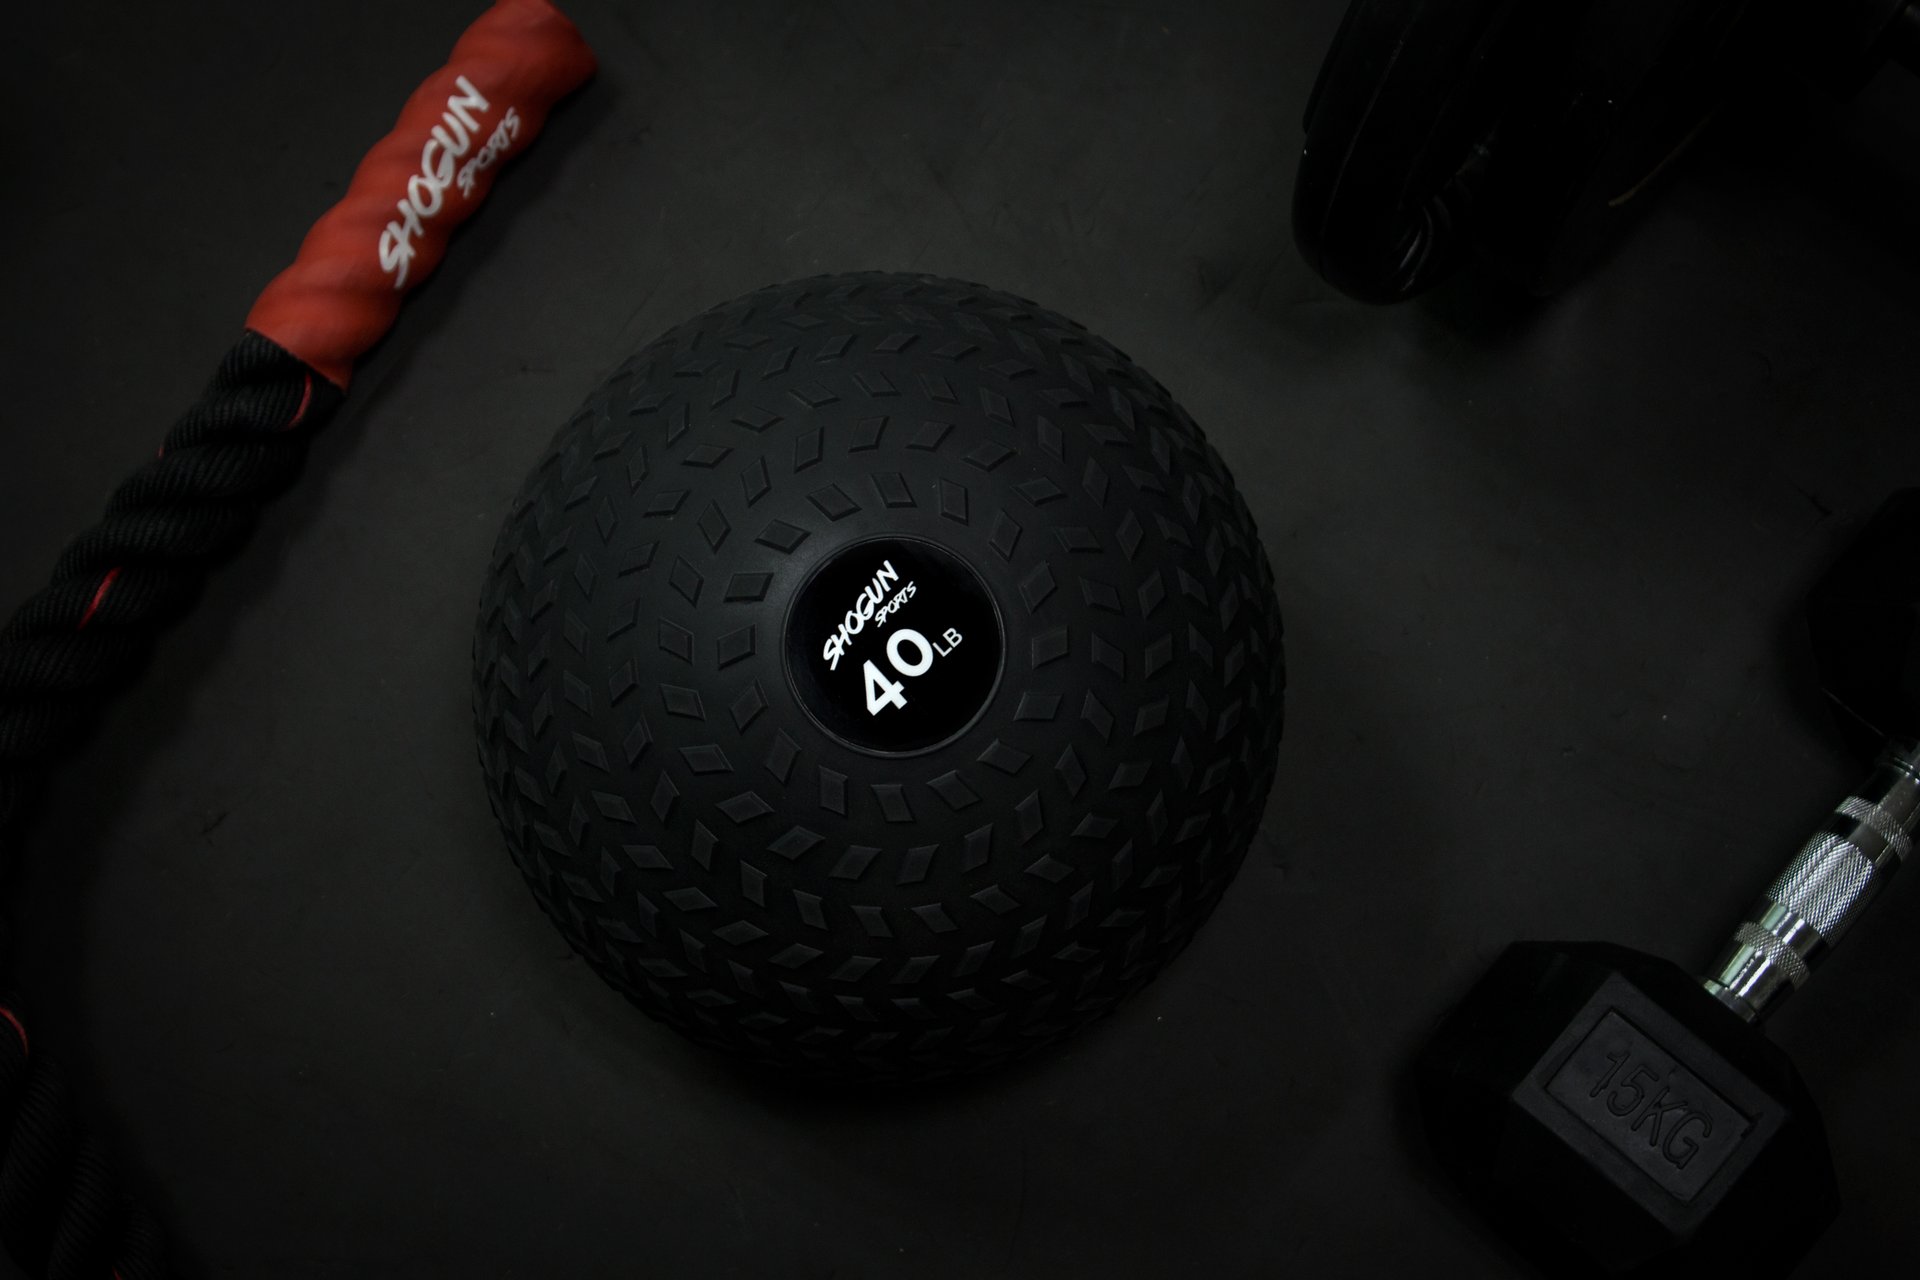 Slam Balls - Shogun Sports Shogun Sports Slam balls are designed for throwing exercises for full body workout. It boost cardio and increase muscle mass. For more details, visit: https://shogunsports.com/ by shogunsports